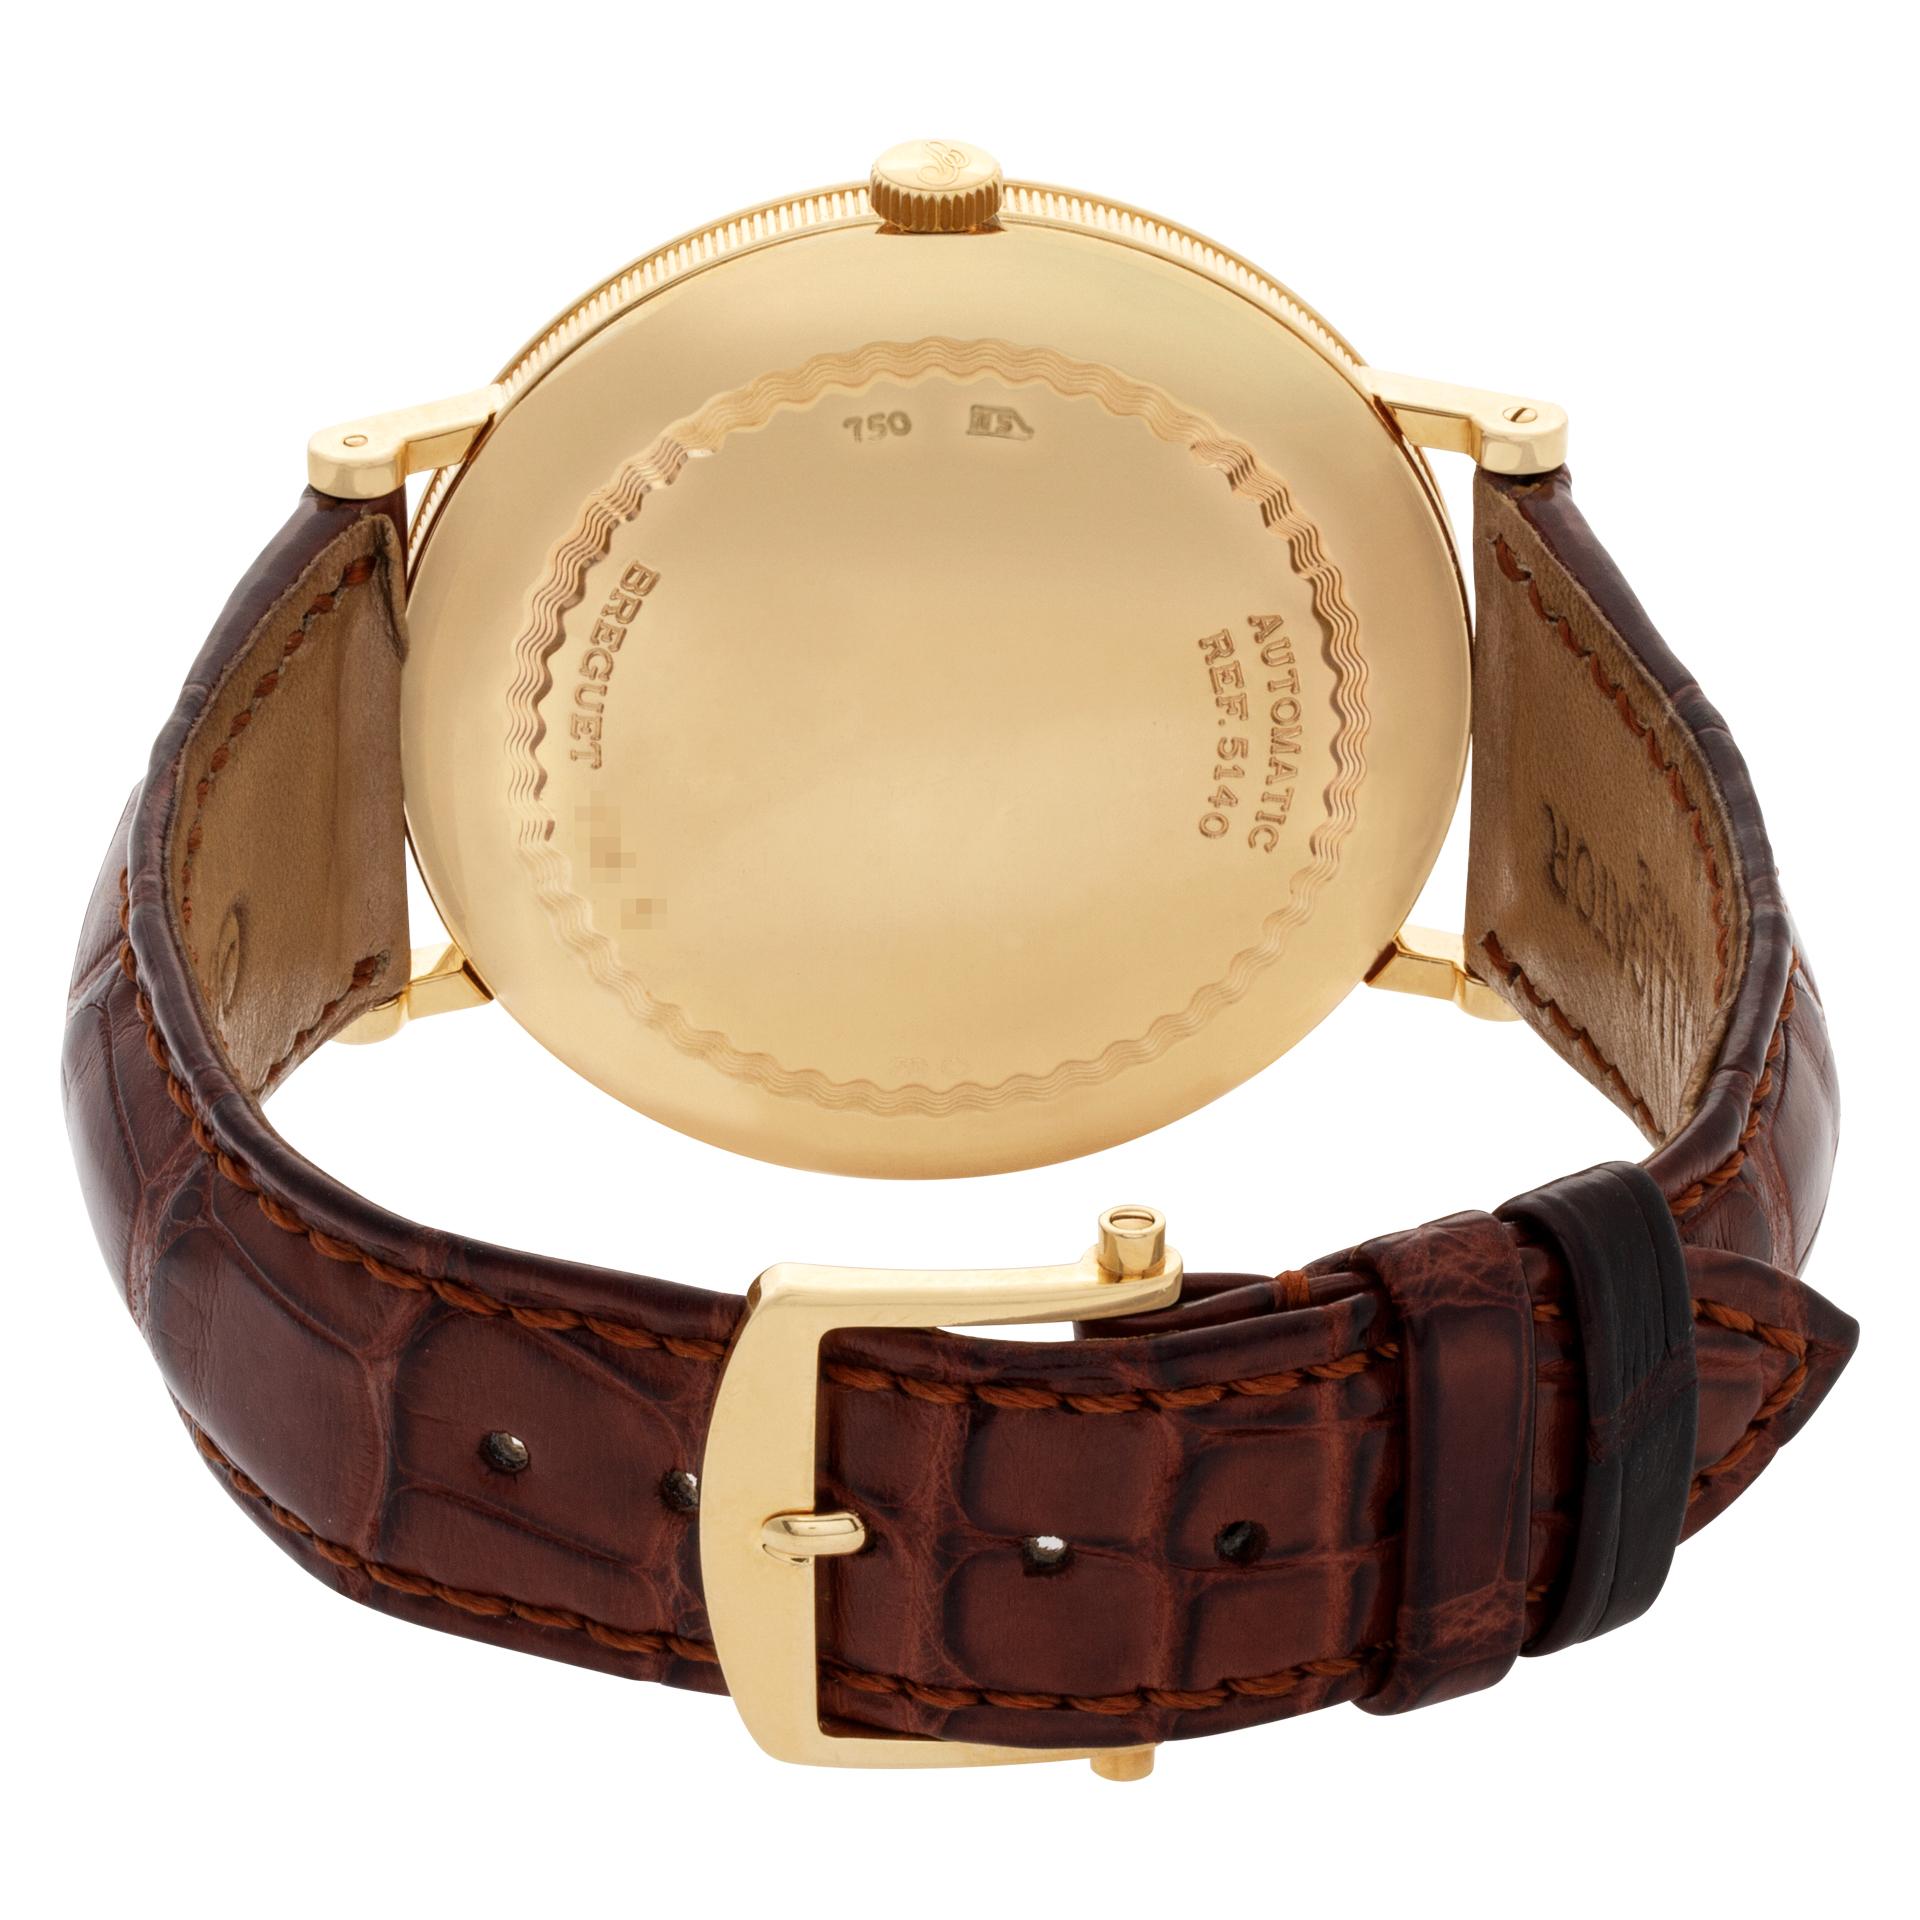 Modern Breguet Classic 18k Yellow Gold and Leather Strap, Ref 5140 Auto Watch